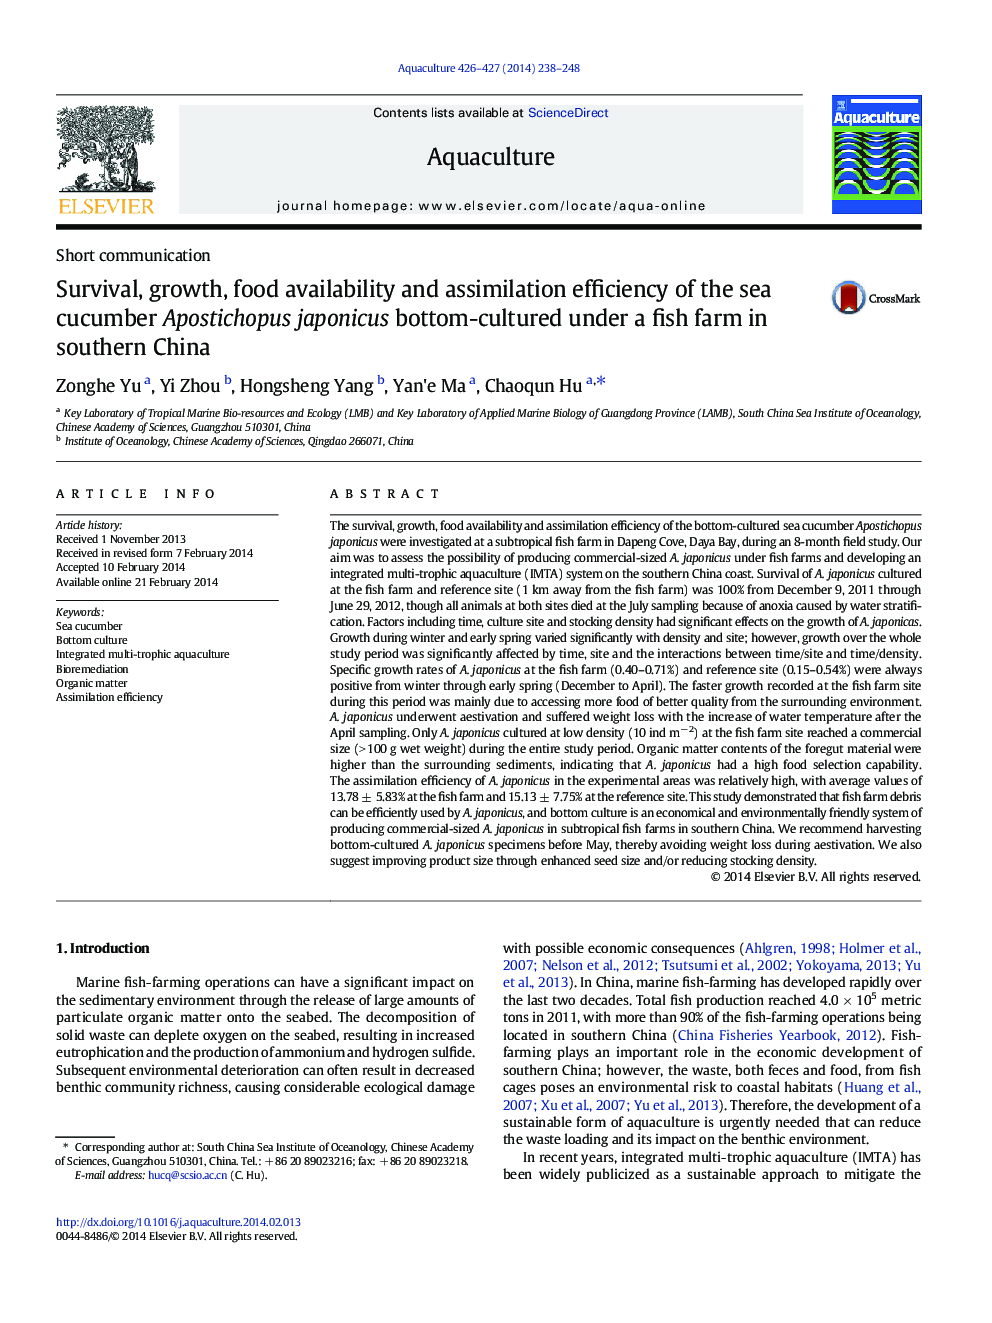 Survival, growth, food availability and assimilation efficiency of the sea cucumber Apostichopus japonicus bottom-cultured under a fish farm in southern China